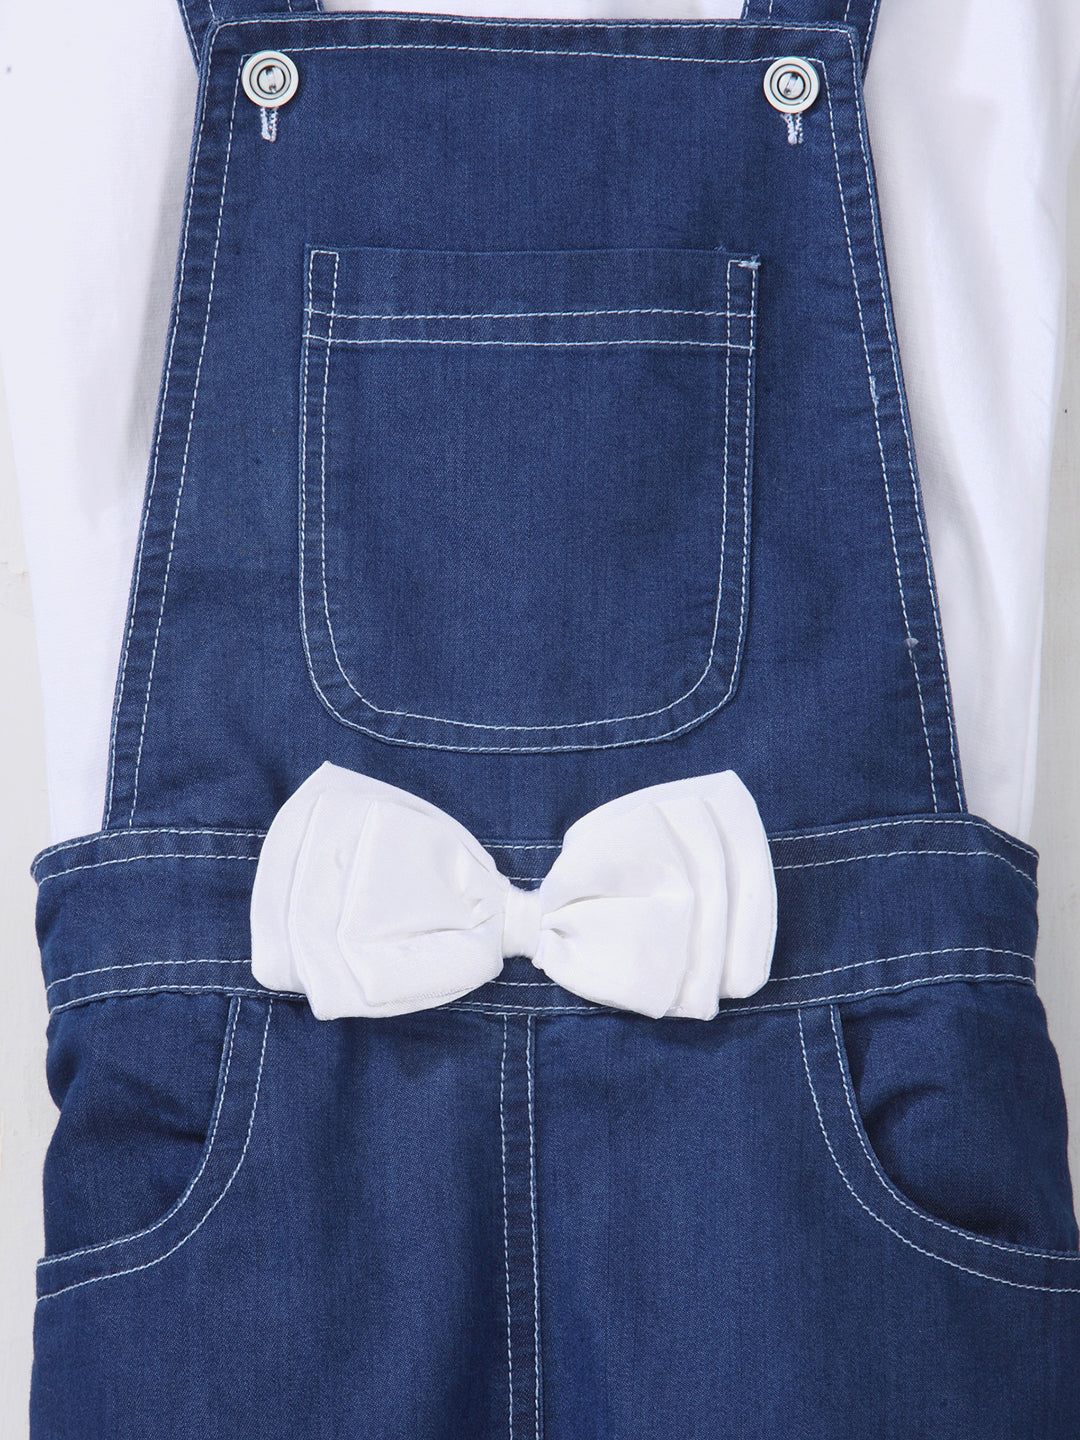 Girls Denim Dungaree Shorts with White Bow and White Sleveless top